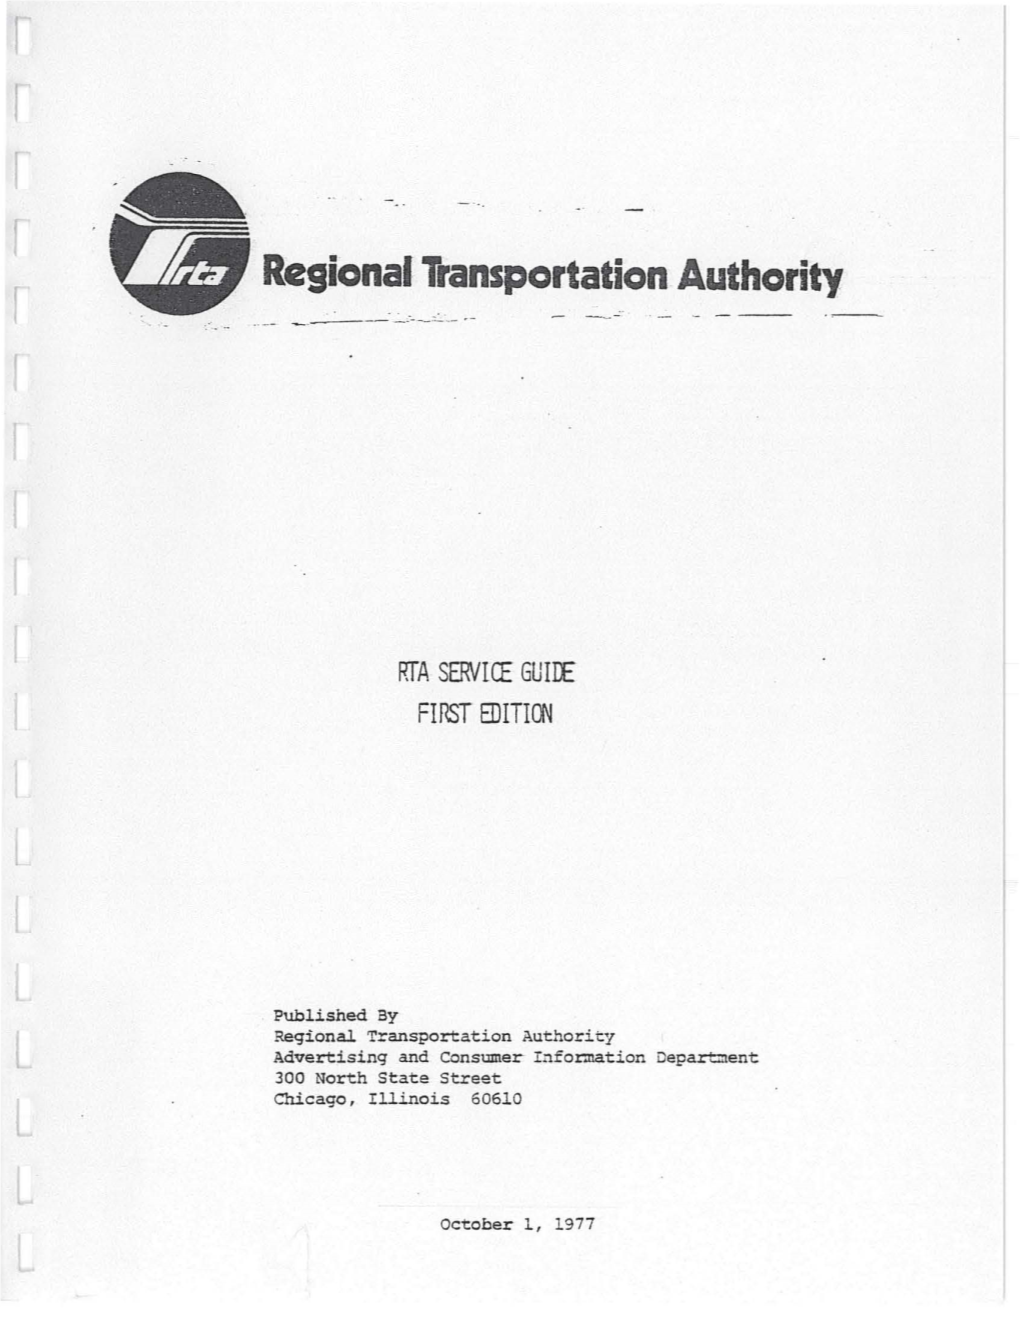 RTA Service Guide First Edition